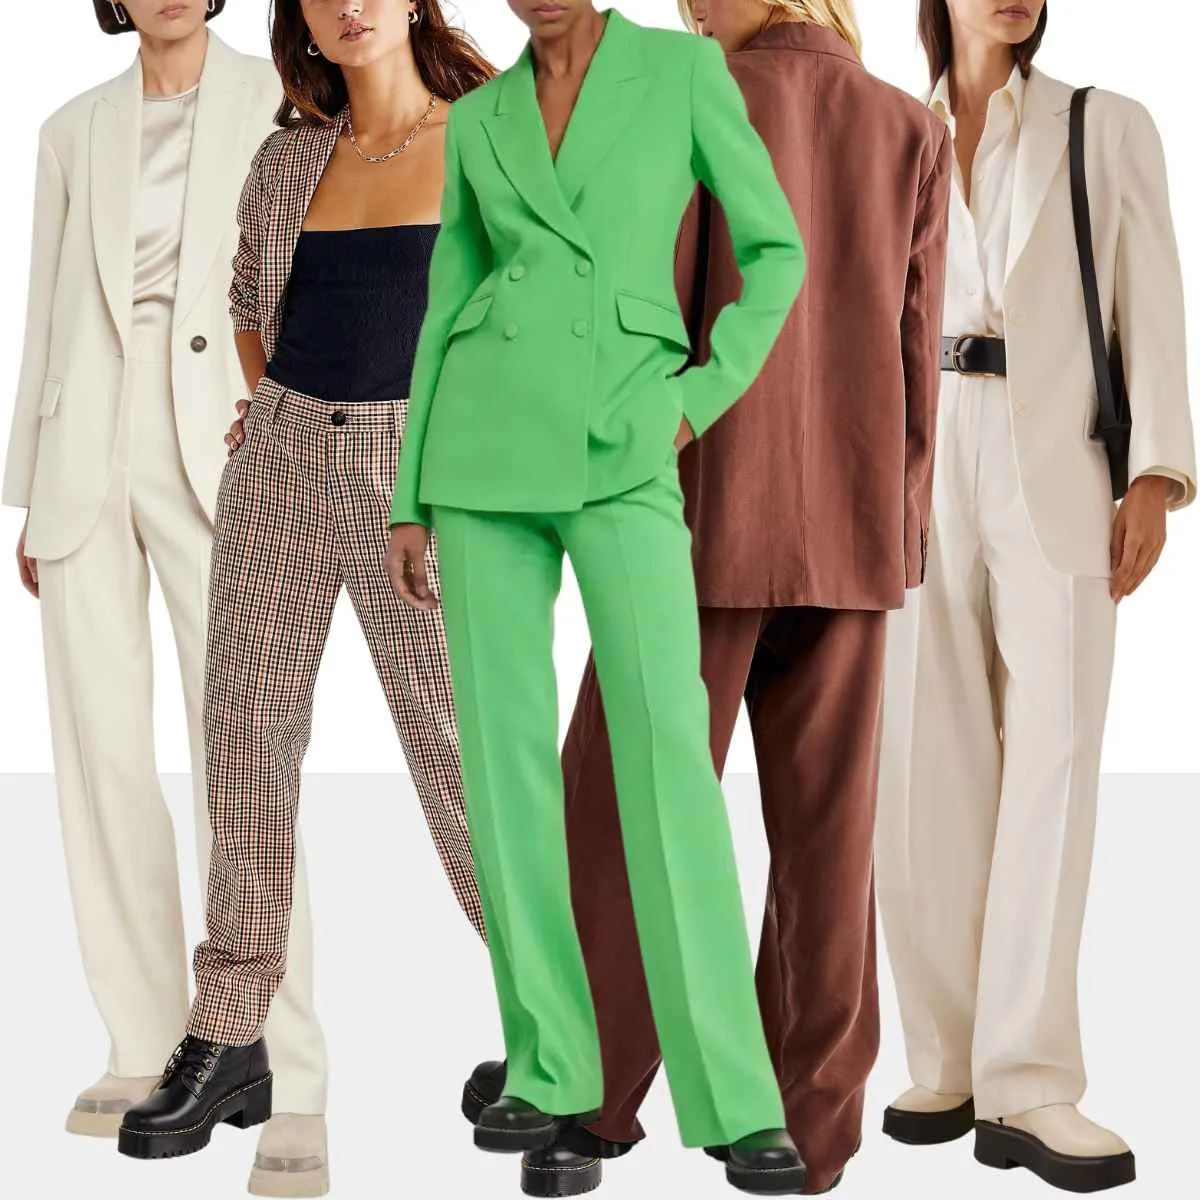 Collage of 5 women wearing various pantsuits with combat boots.